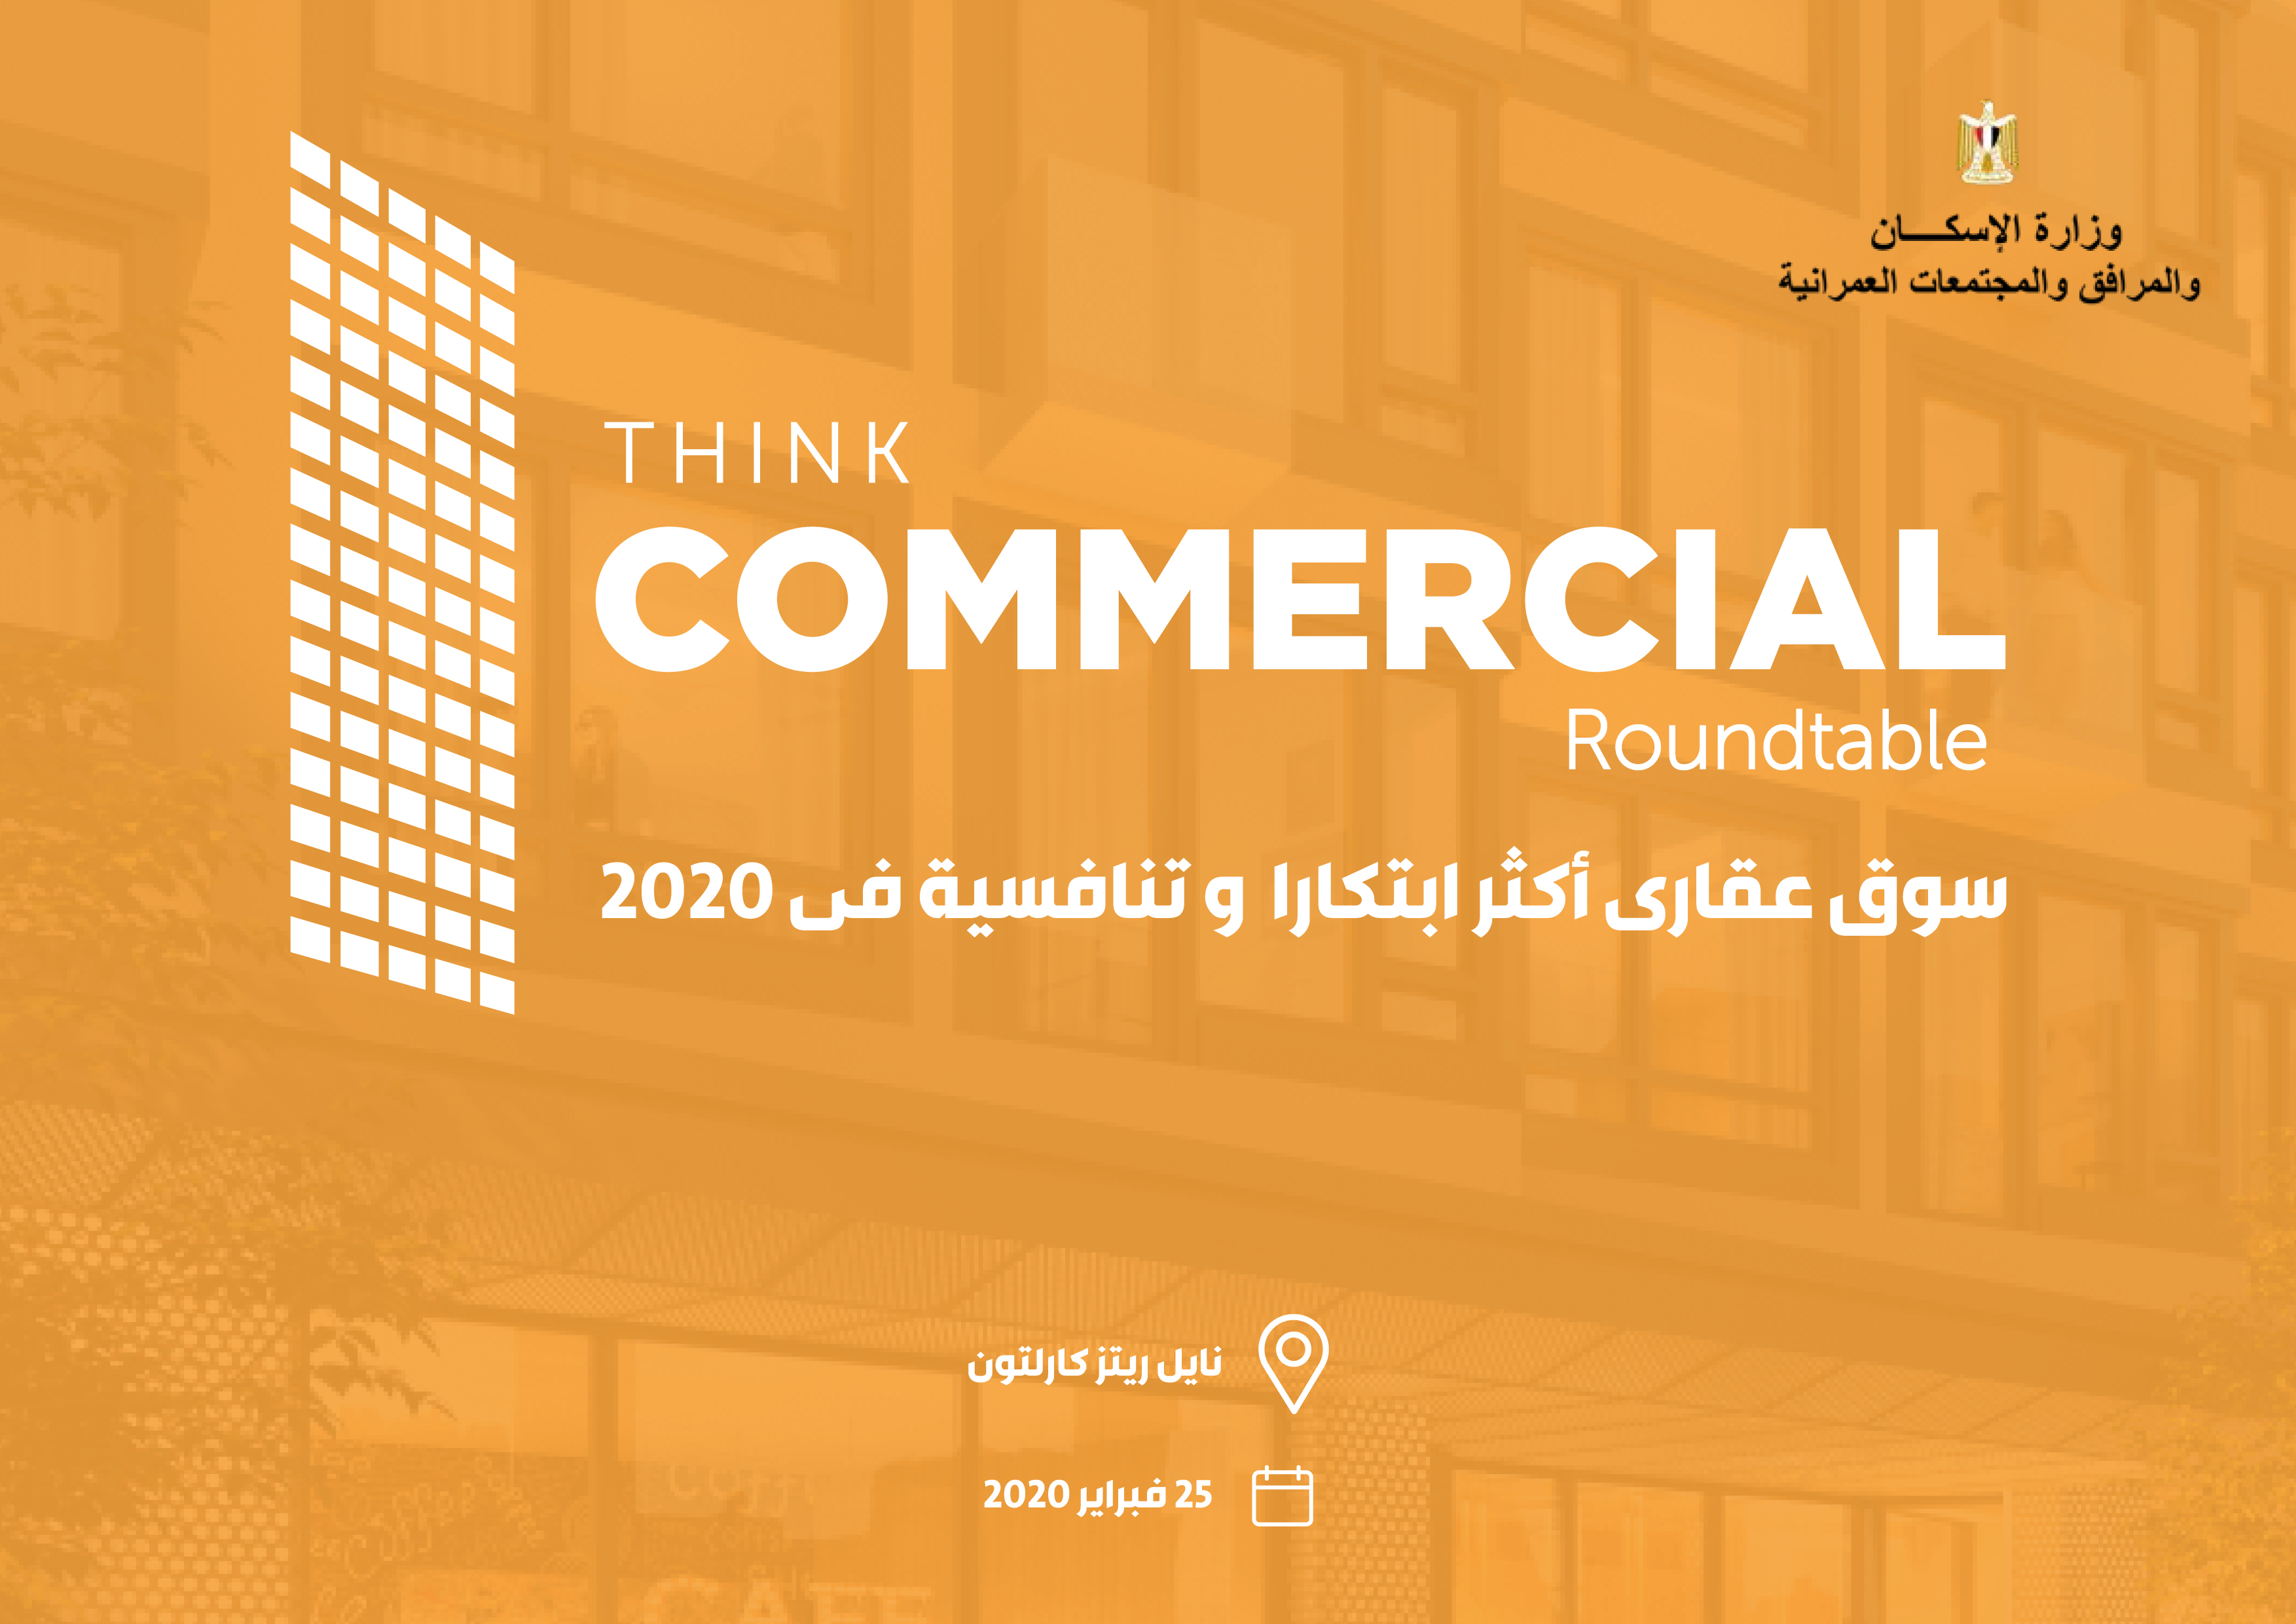 Think Commercial Roundtable February 2020